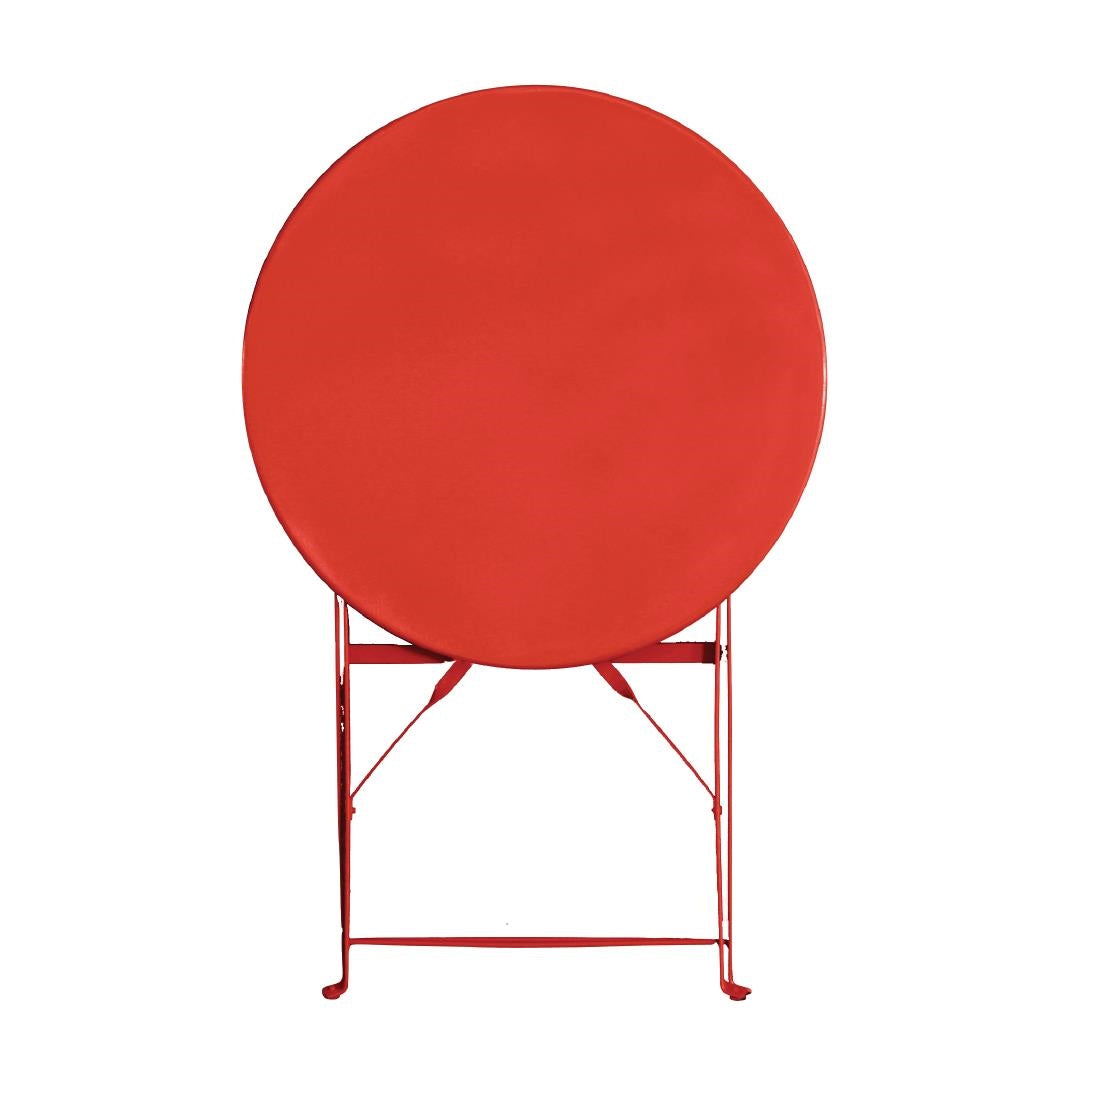 GH560 Bolero Pavement Style Round Steel Table Red 595mm JD Catering Equipment Solutions Ltd